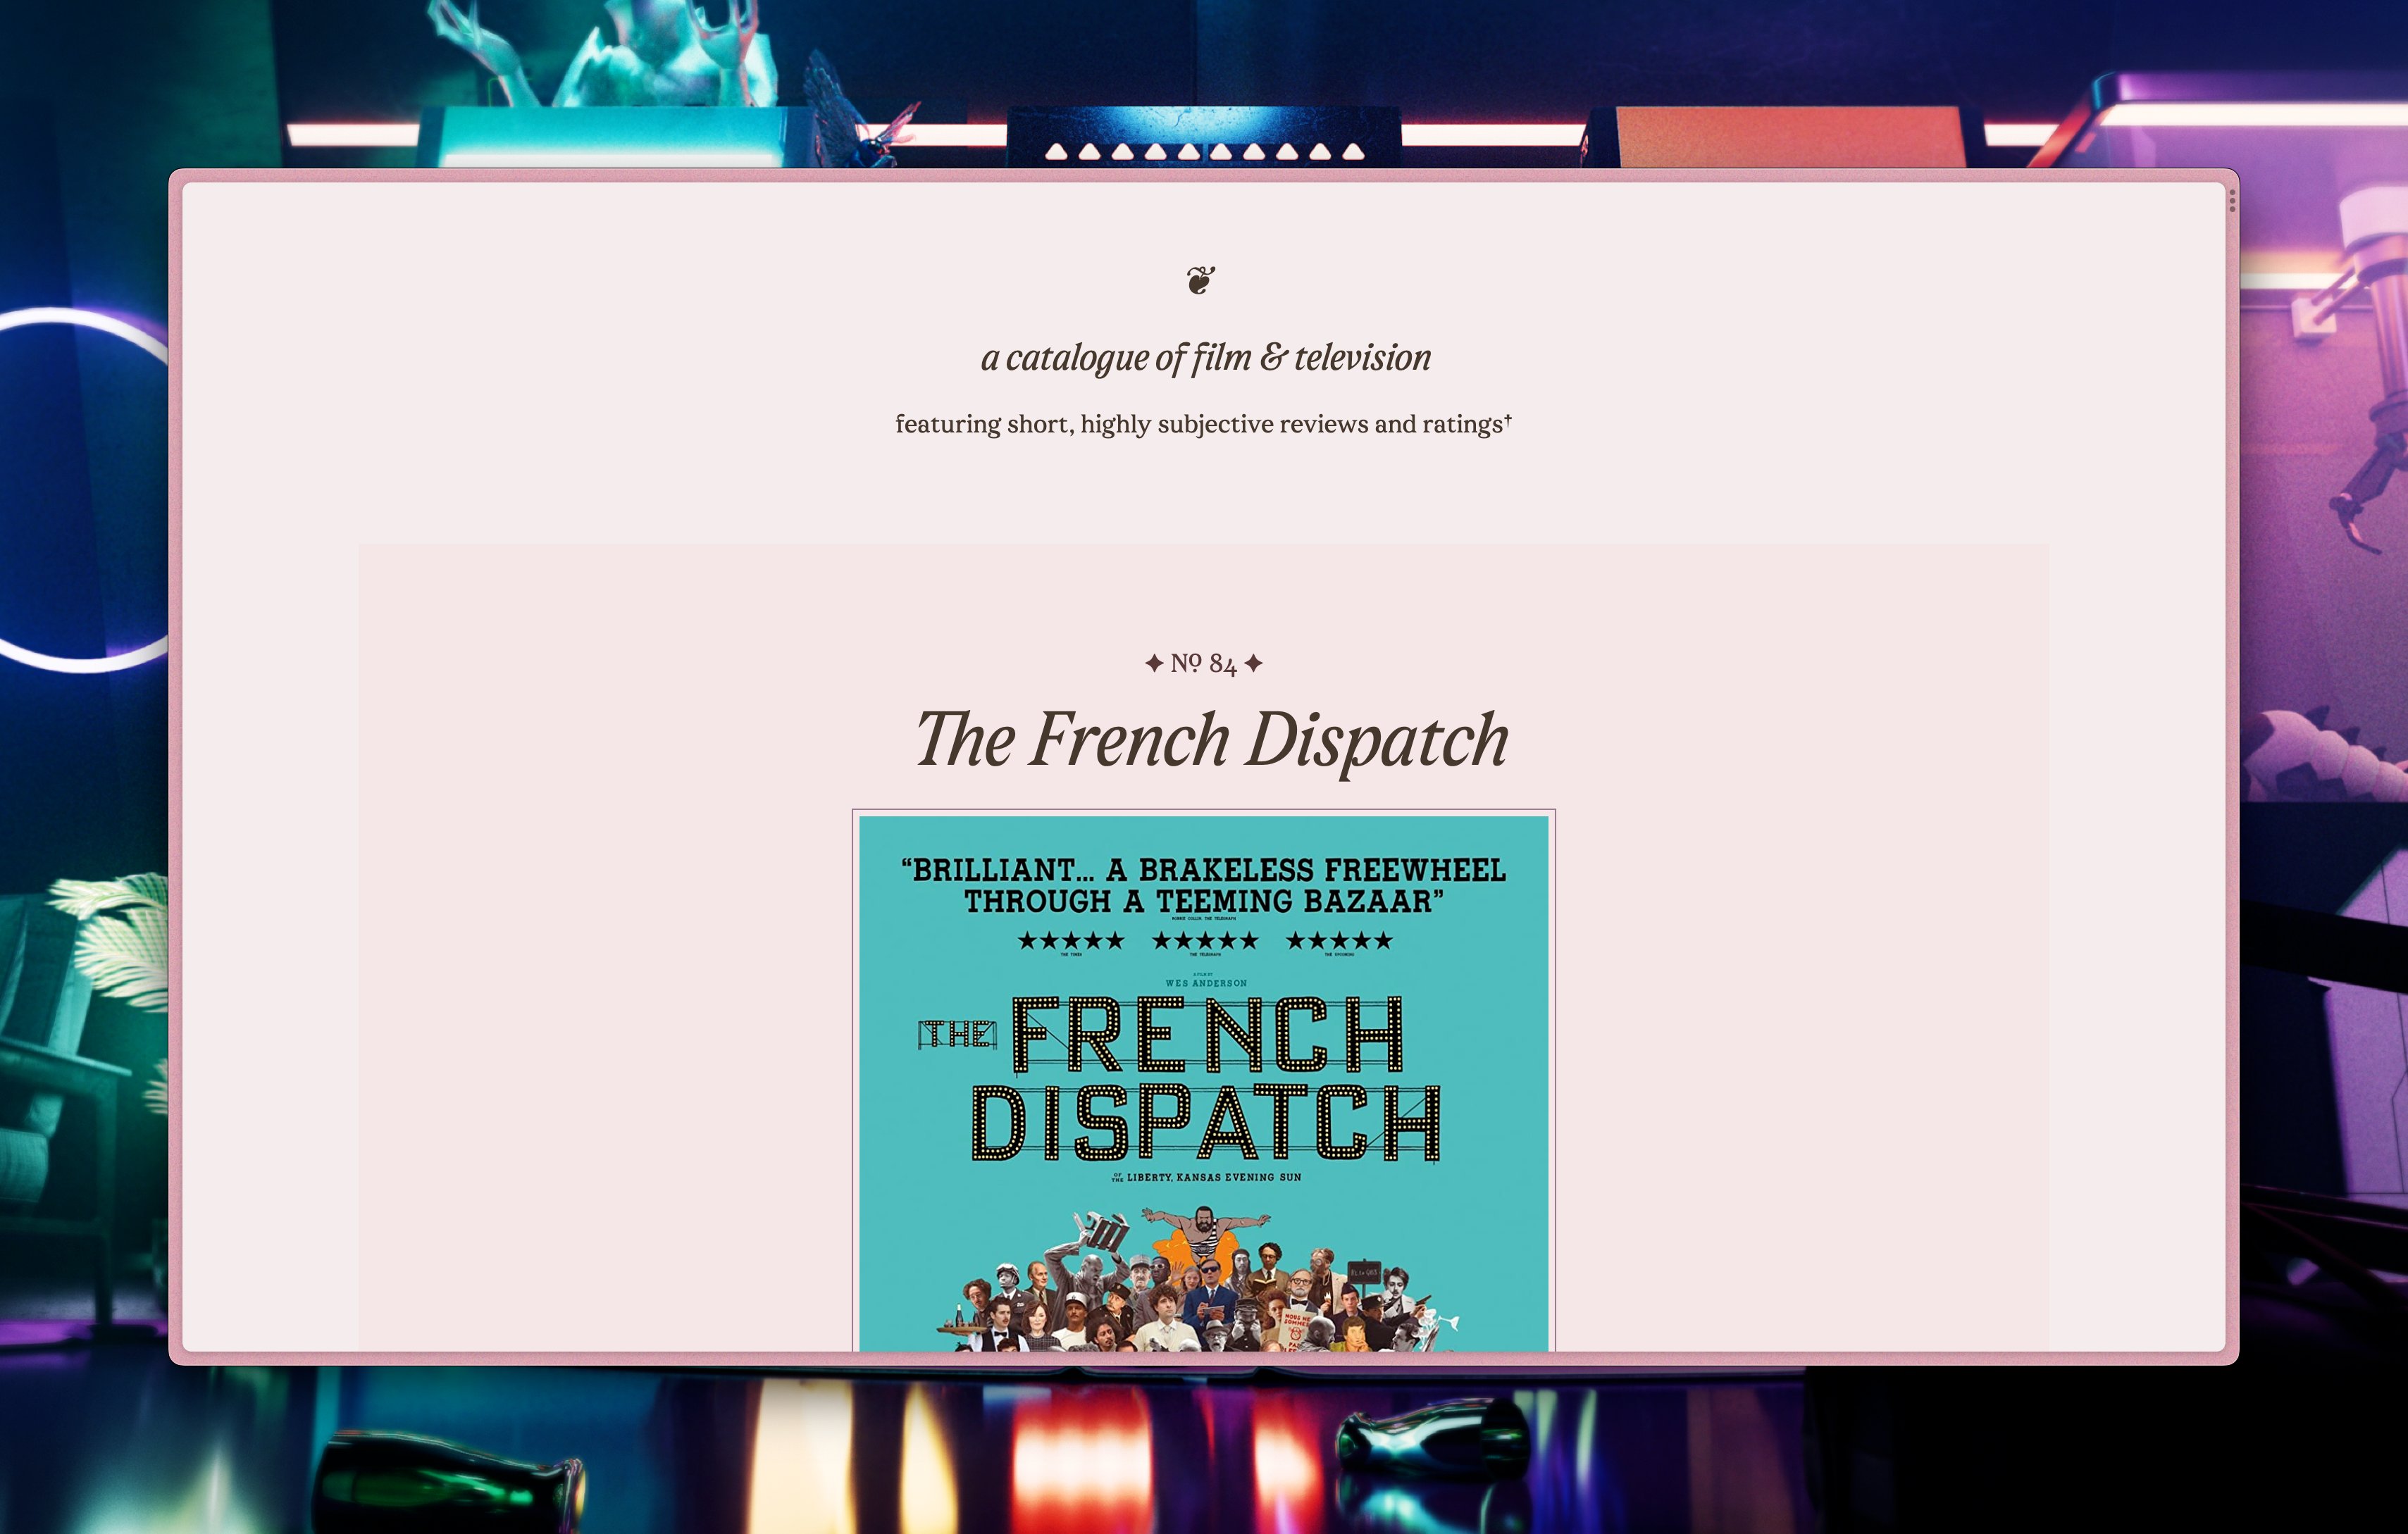 Work in progress screenshot of my movie tracker, showing an elegant serif font and the movie The French Dispatch